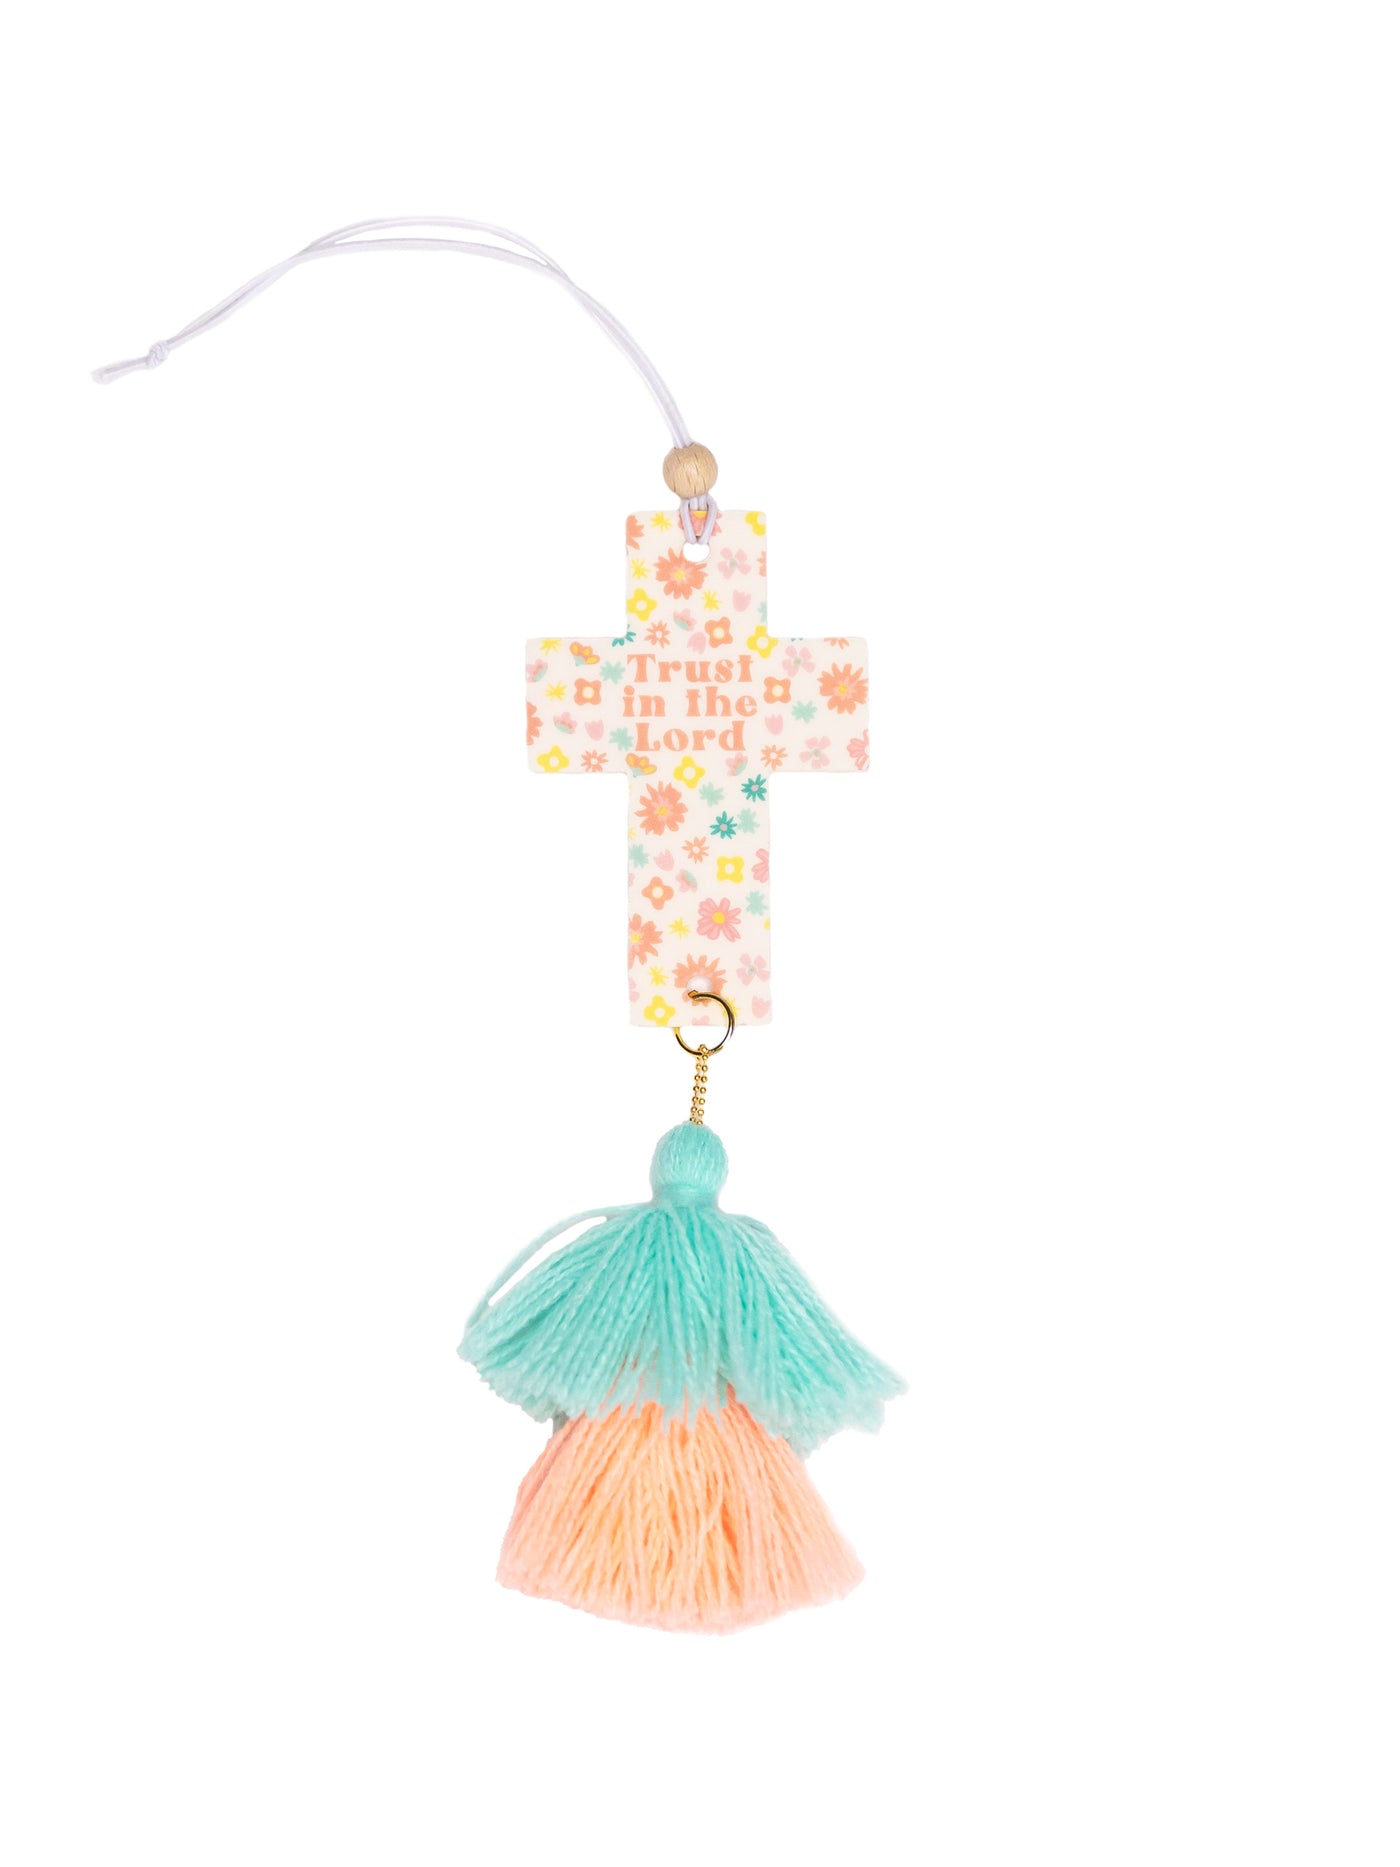 Trust In The Lord | Air Freshener - Mary Square, LLC